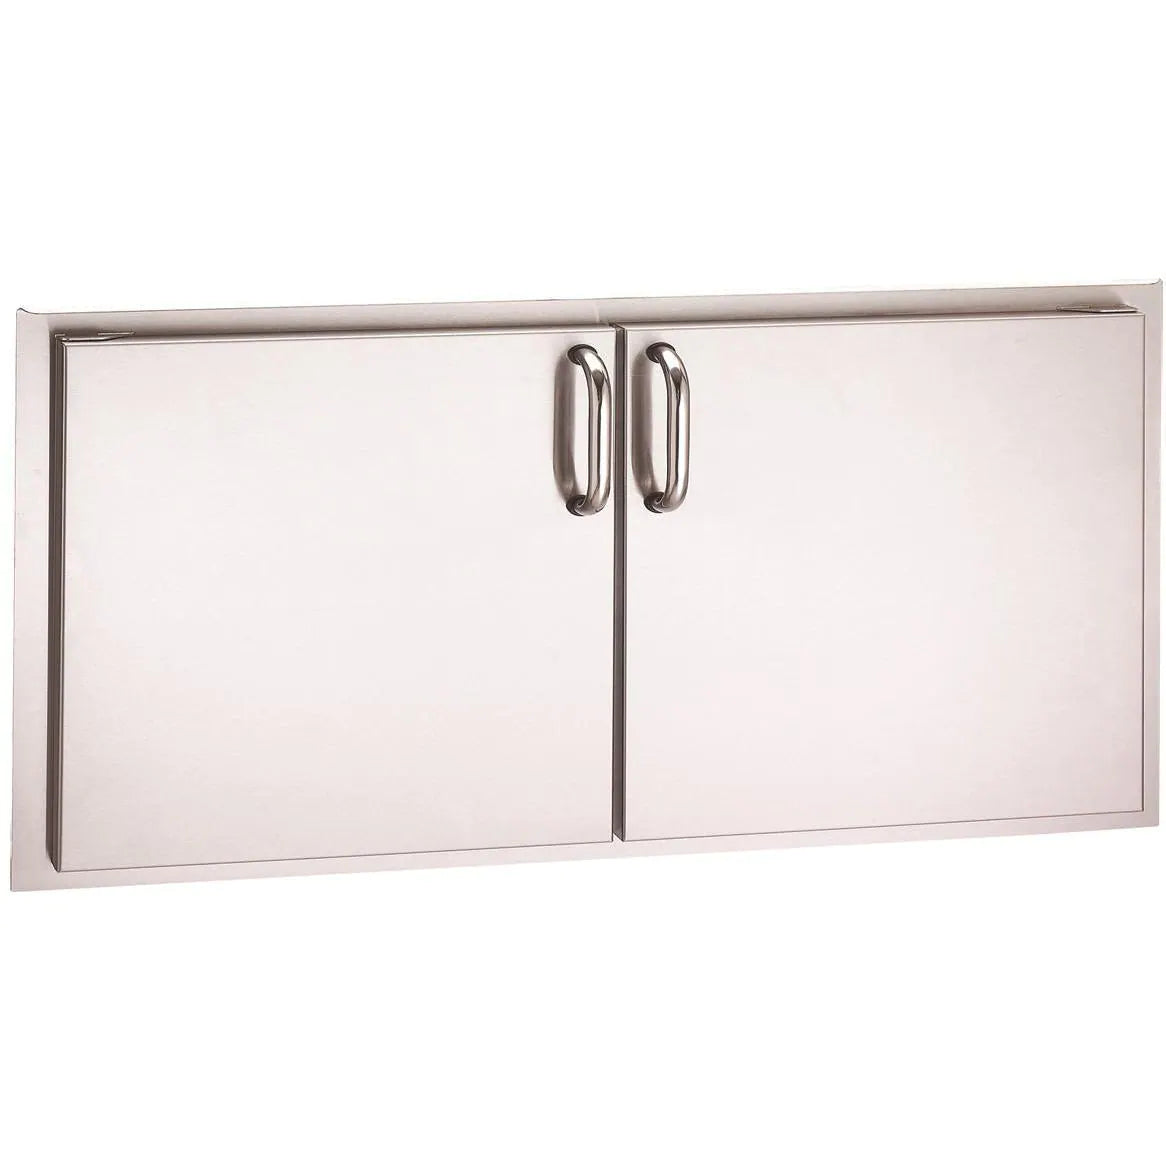 Fire Magic Select 39 Inch Double Access Doors